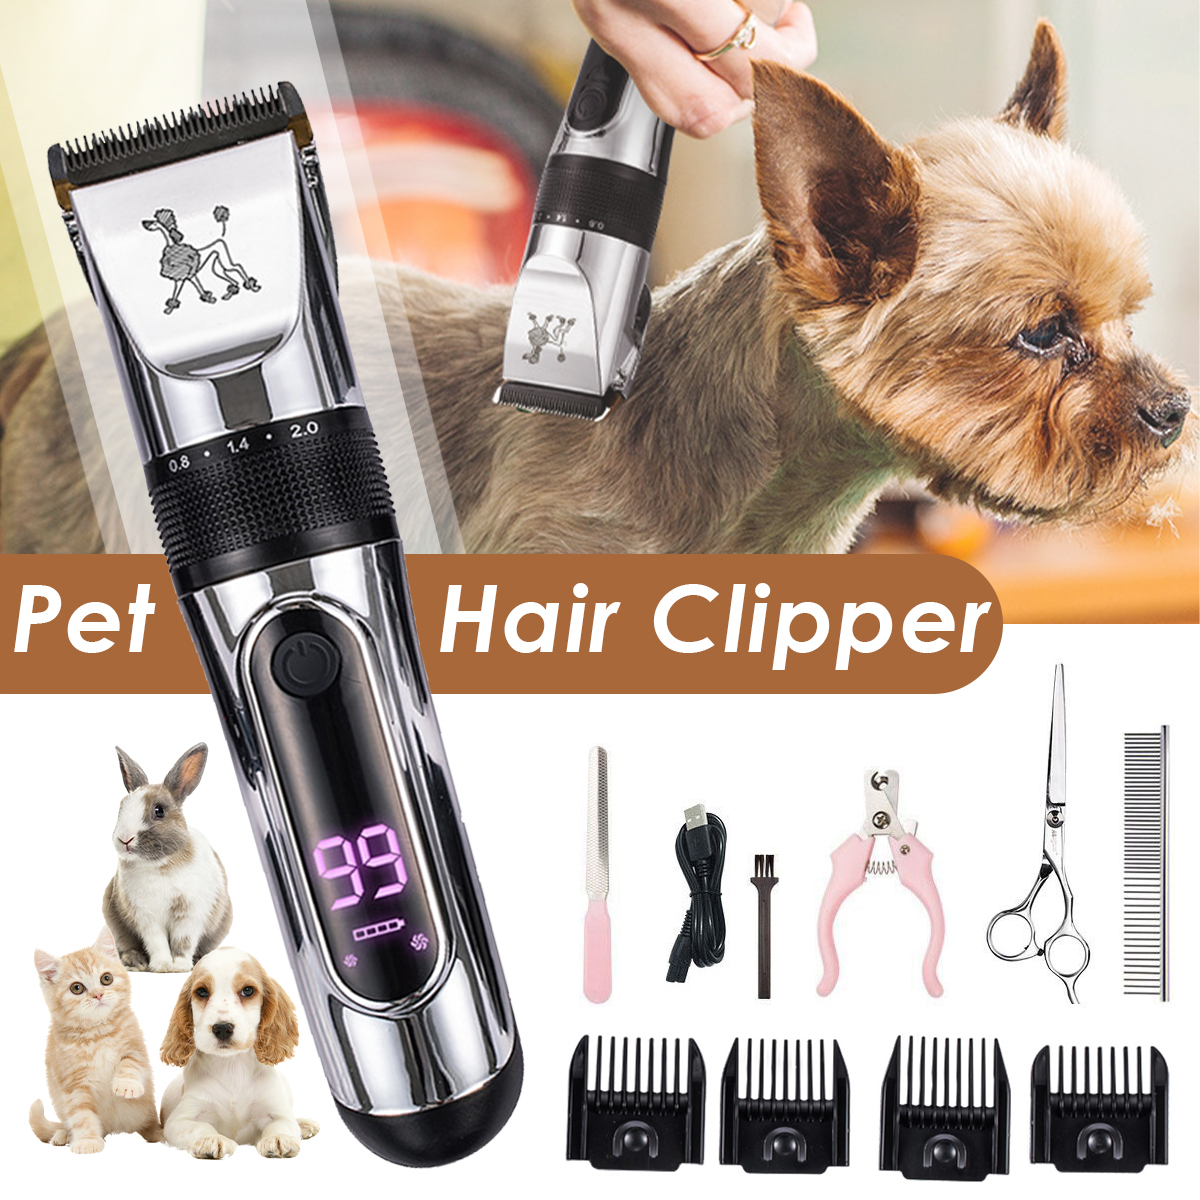 Professional-Pet-Dog-Cat-Animal-Clippers-Hair-Grooming-Cordless-Trimmer-Shaver-1958940-1